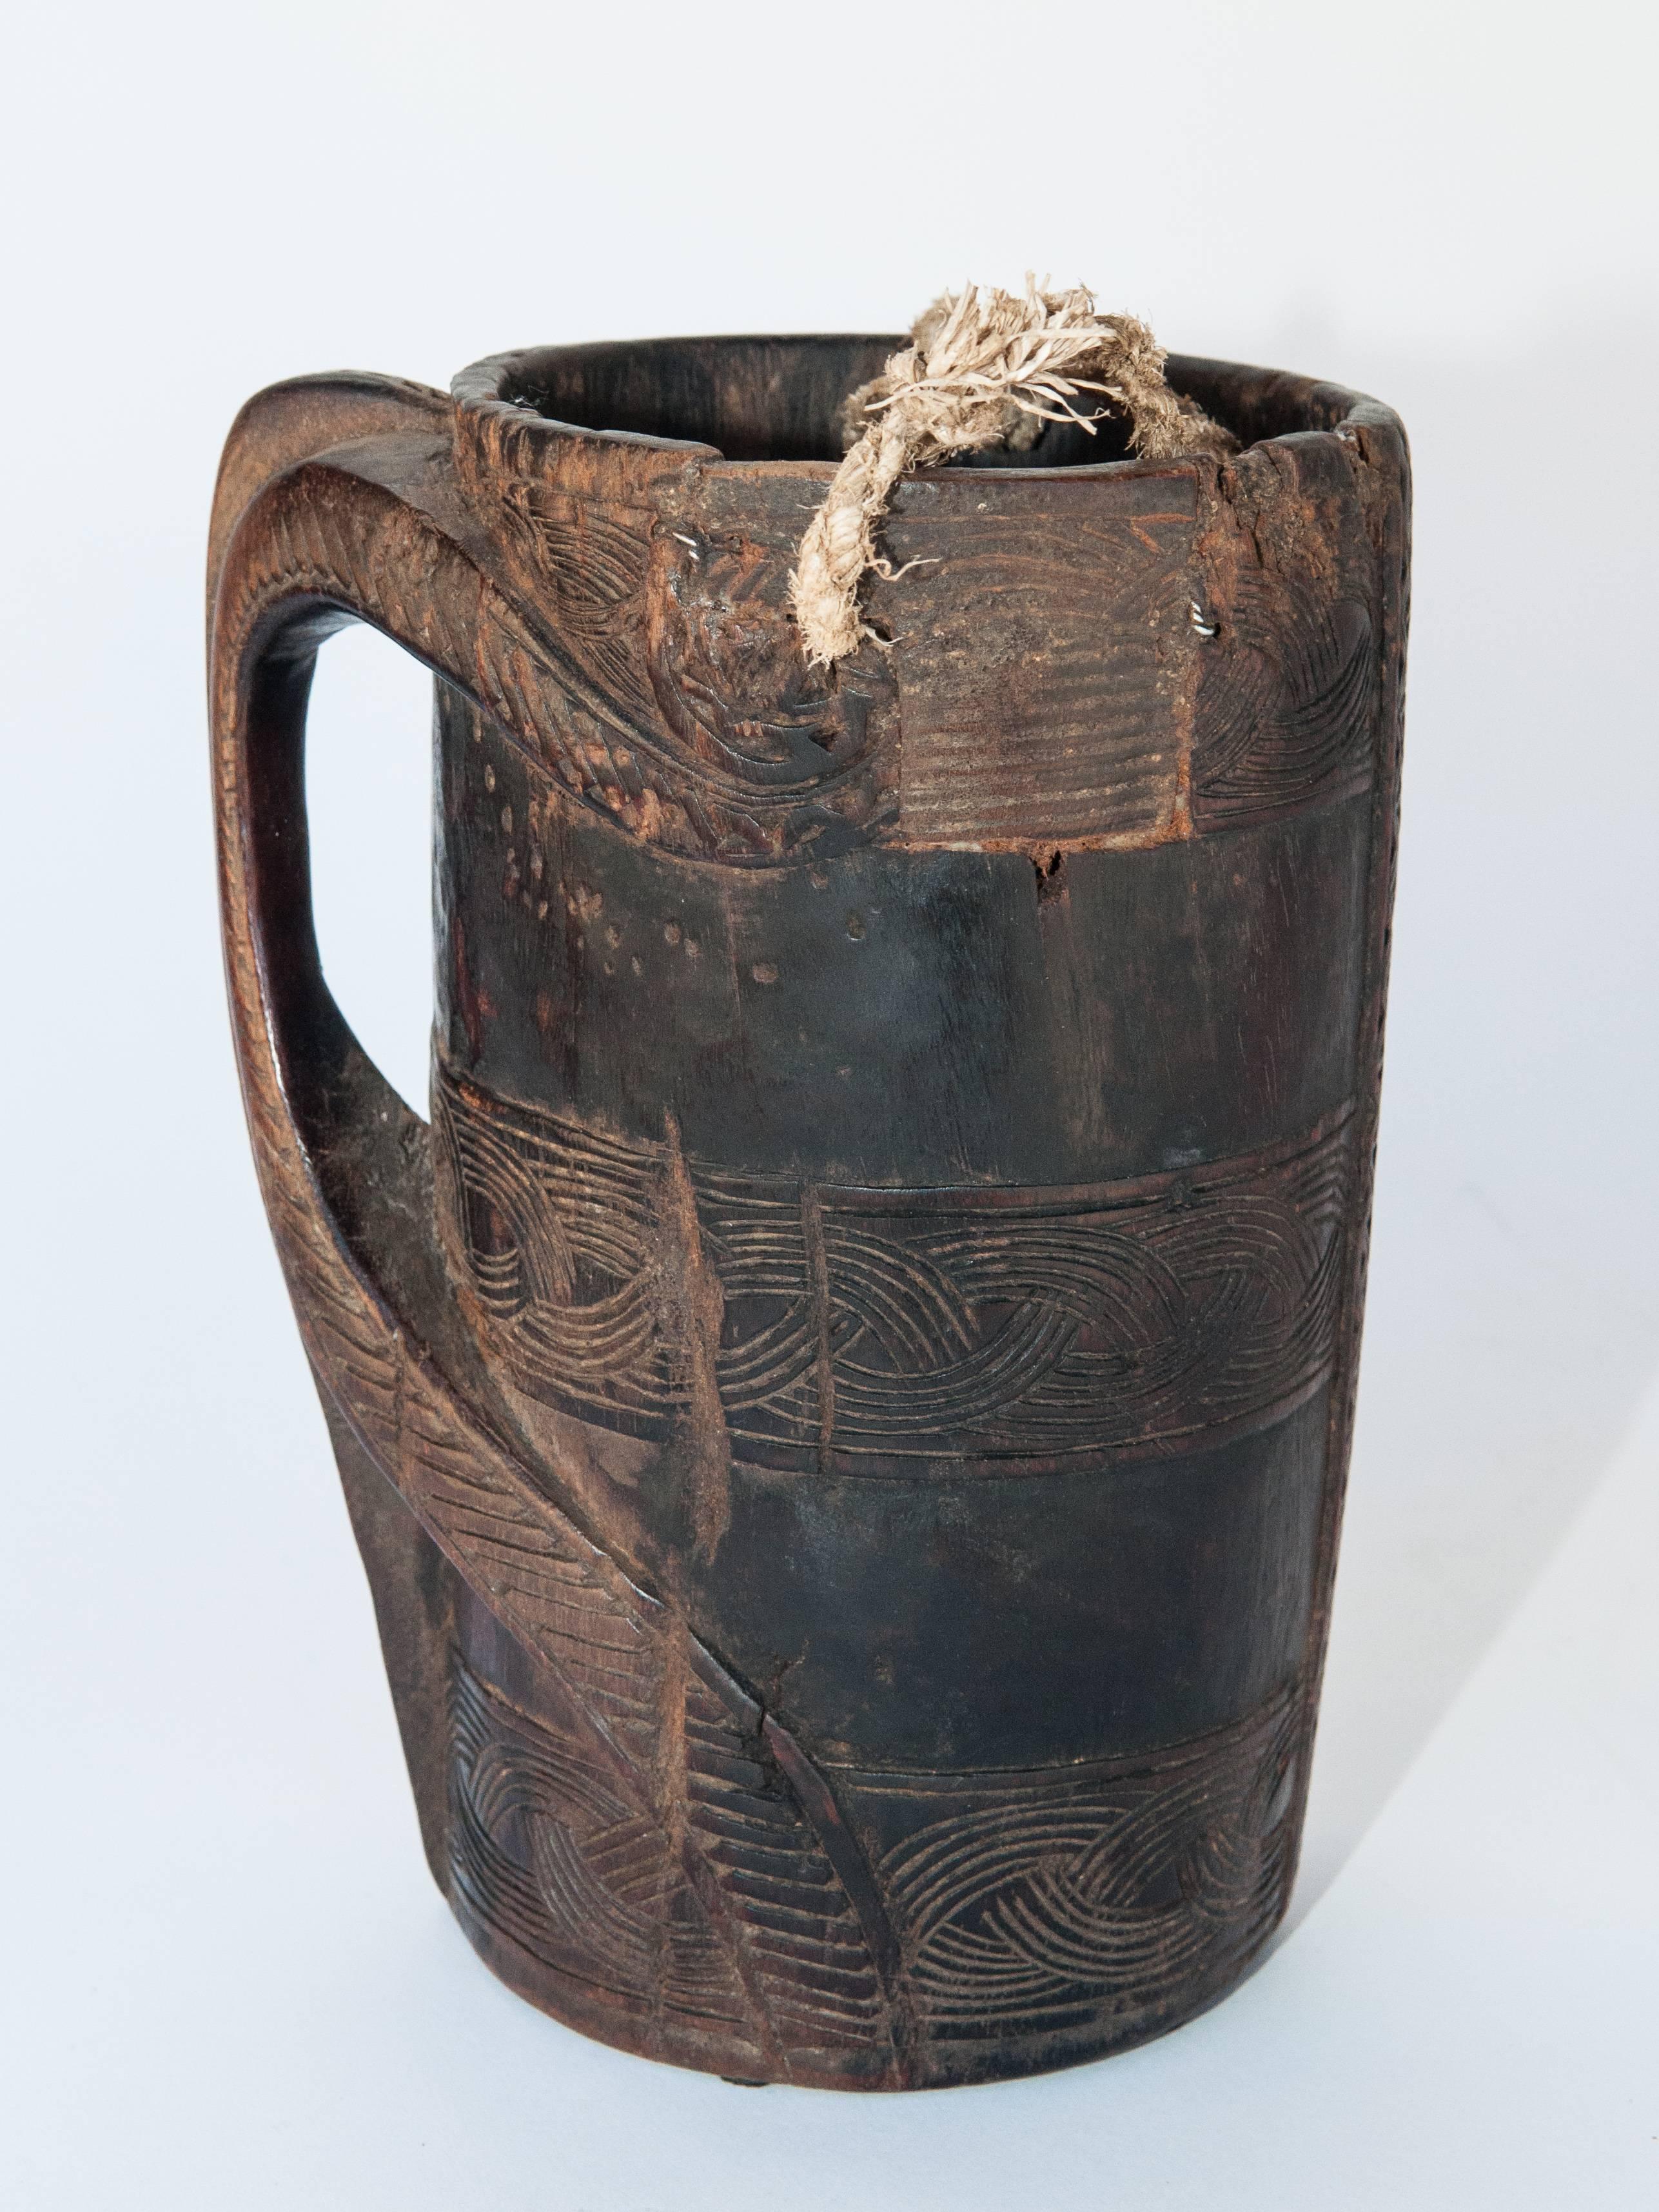 Wooden Carved Milk Pot with Stylized Monkey Motif. Mid-Late 20th Century. From the Middle Hills of West Nepal.
This rustic milk pot was hand carved of local hardwood in the middle hills of western Nepal,  using very basic tools. Geometric designs